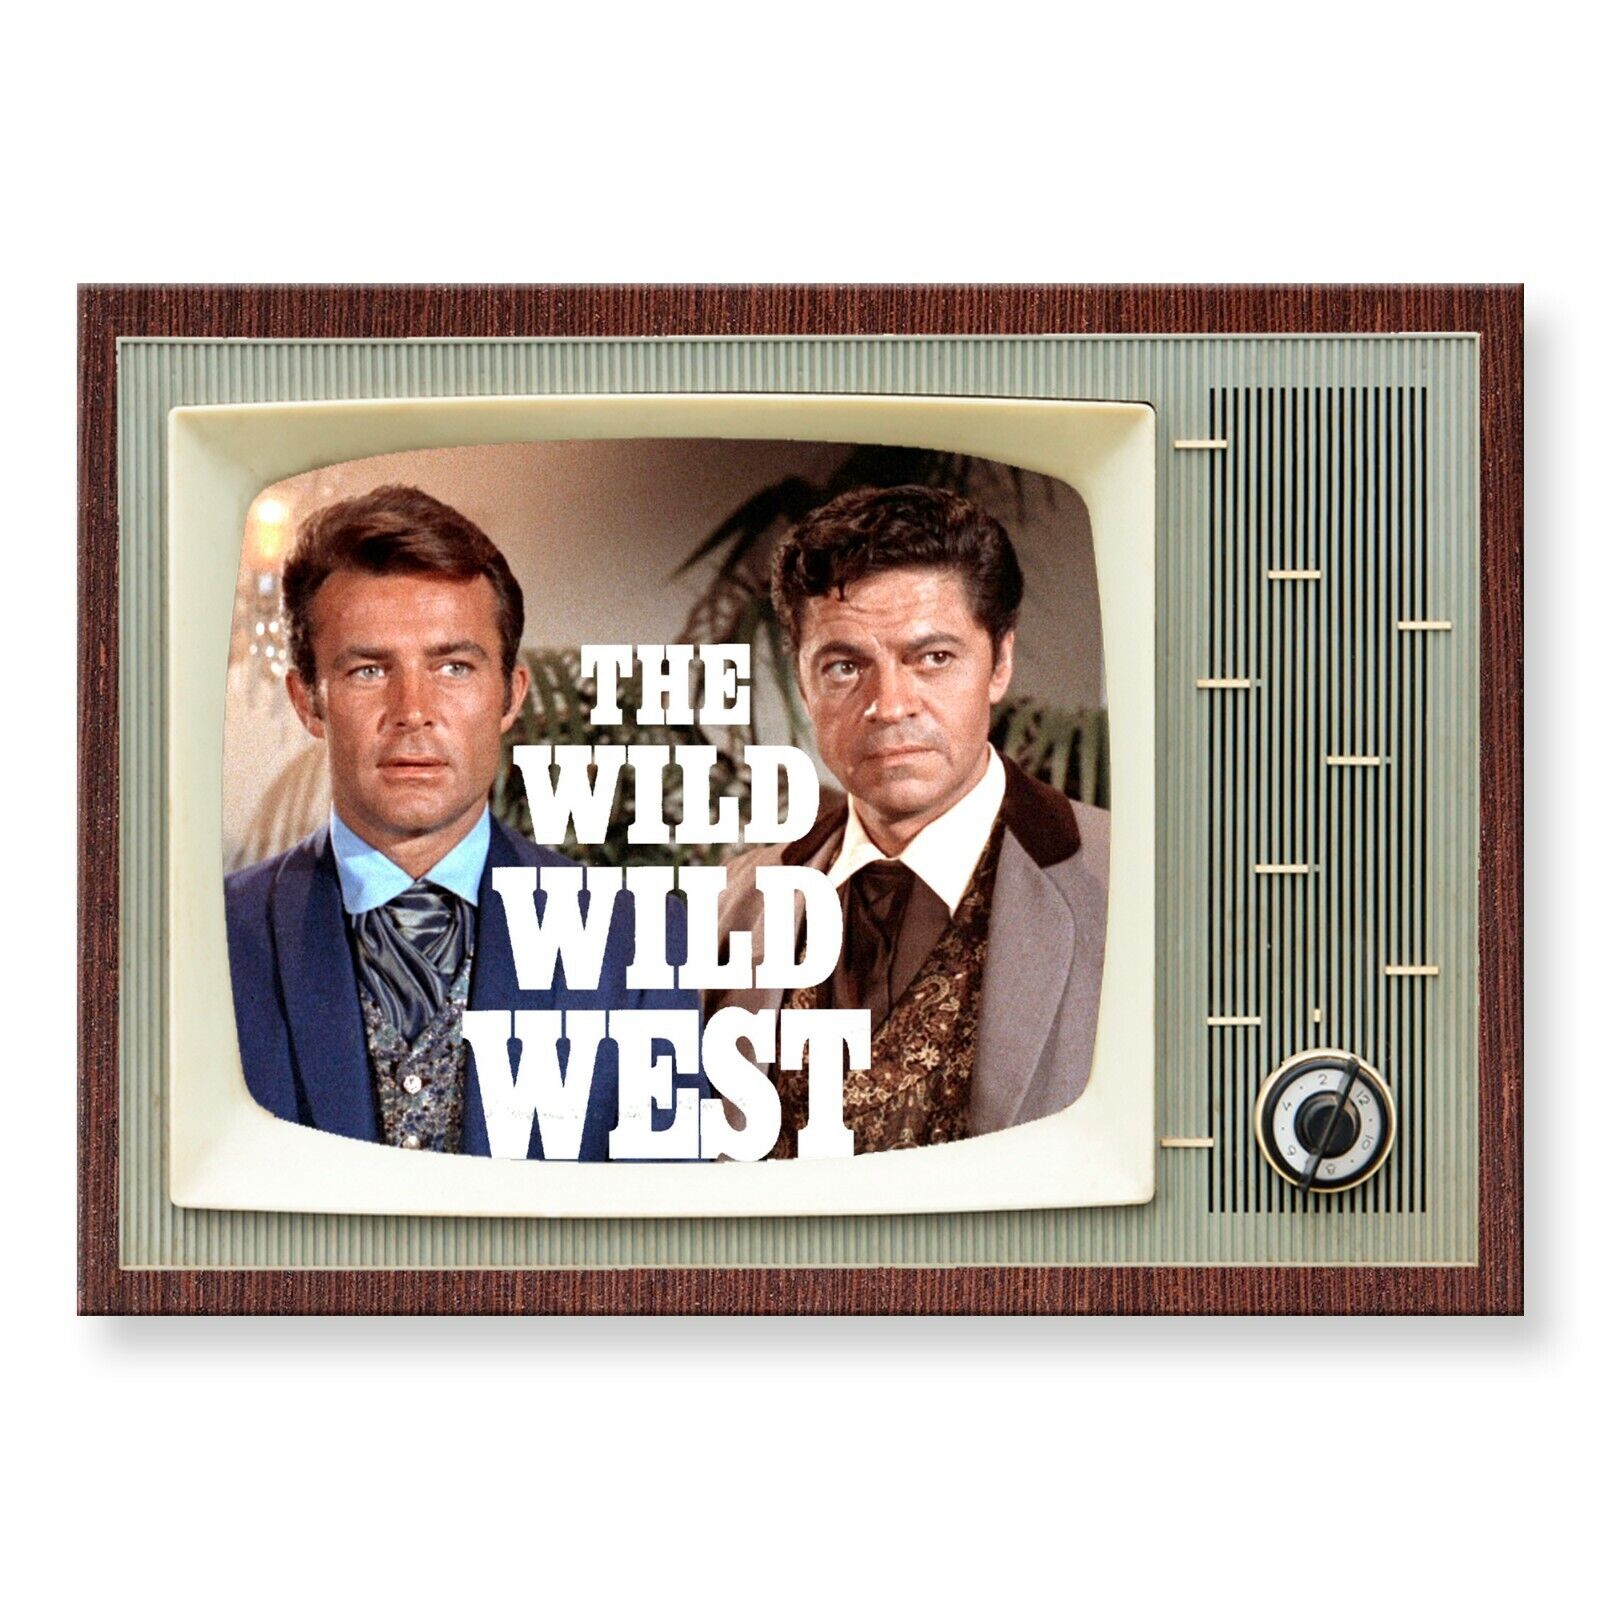 THE WILD WILD WEST TV Show Classic TV 3.5 inches x 2.5 inches FRIDGE MAGNET